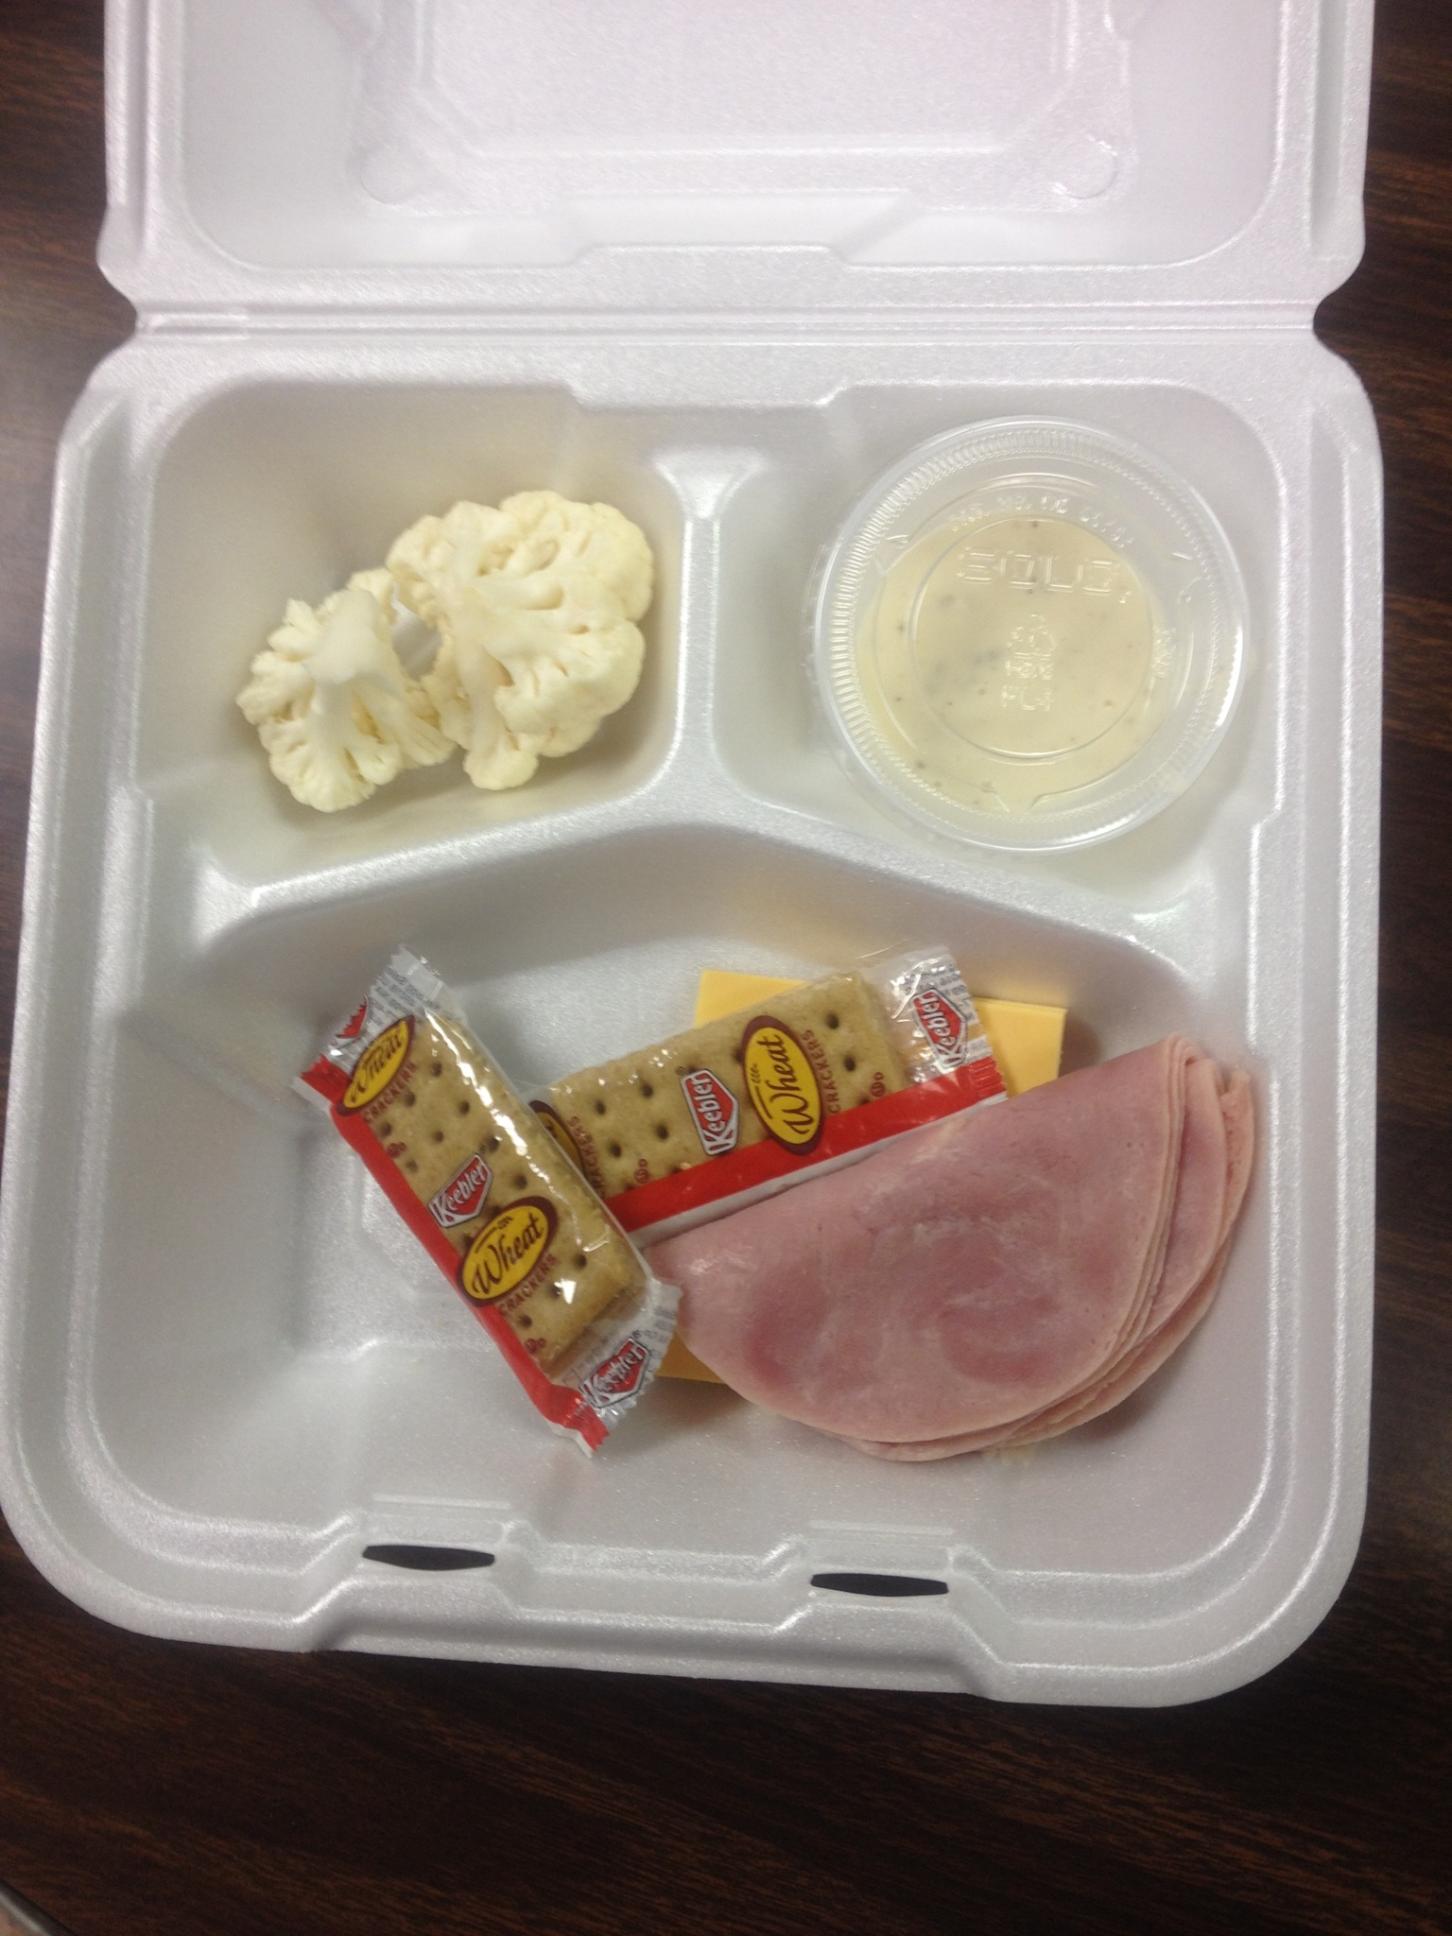 Student Kaytlin Shelton took a photo of the skimpy lunch and showed it to her parents. Lunch meat, a couple of crackers, a slice of cheese and two pieces of cauliflower qualified as lunch in Chickasha Public Schools. The Obama's care about your children...right?